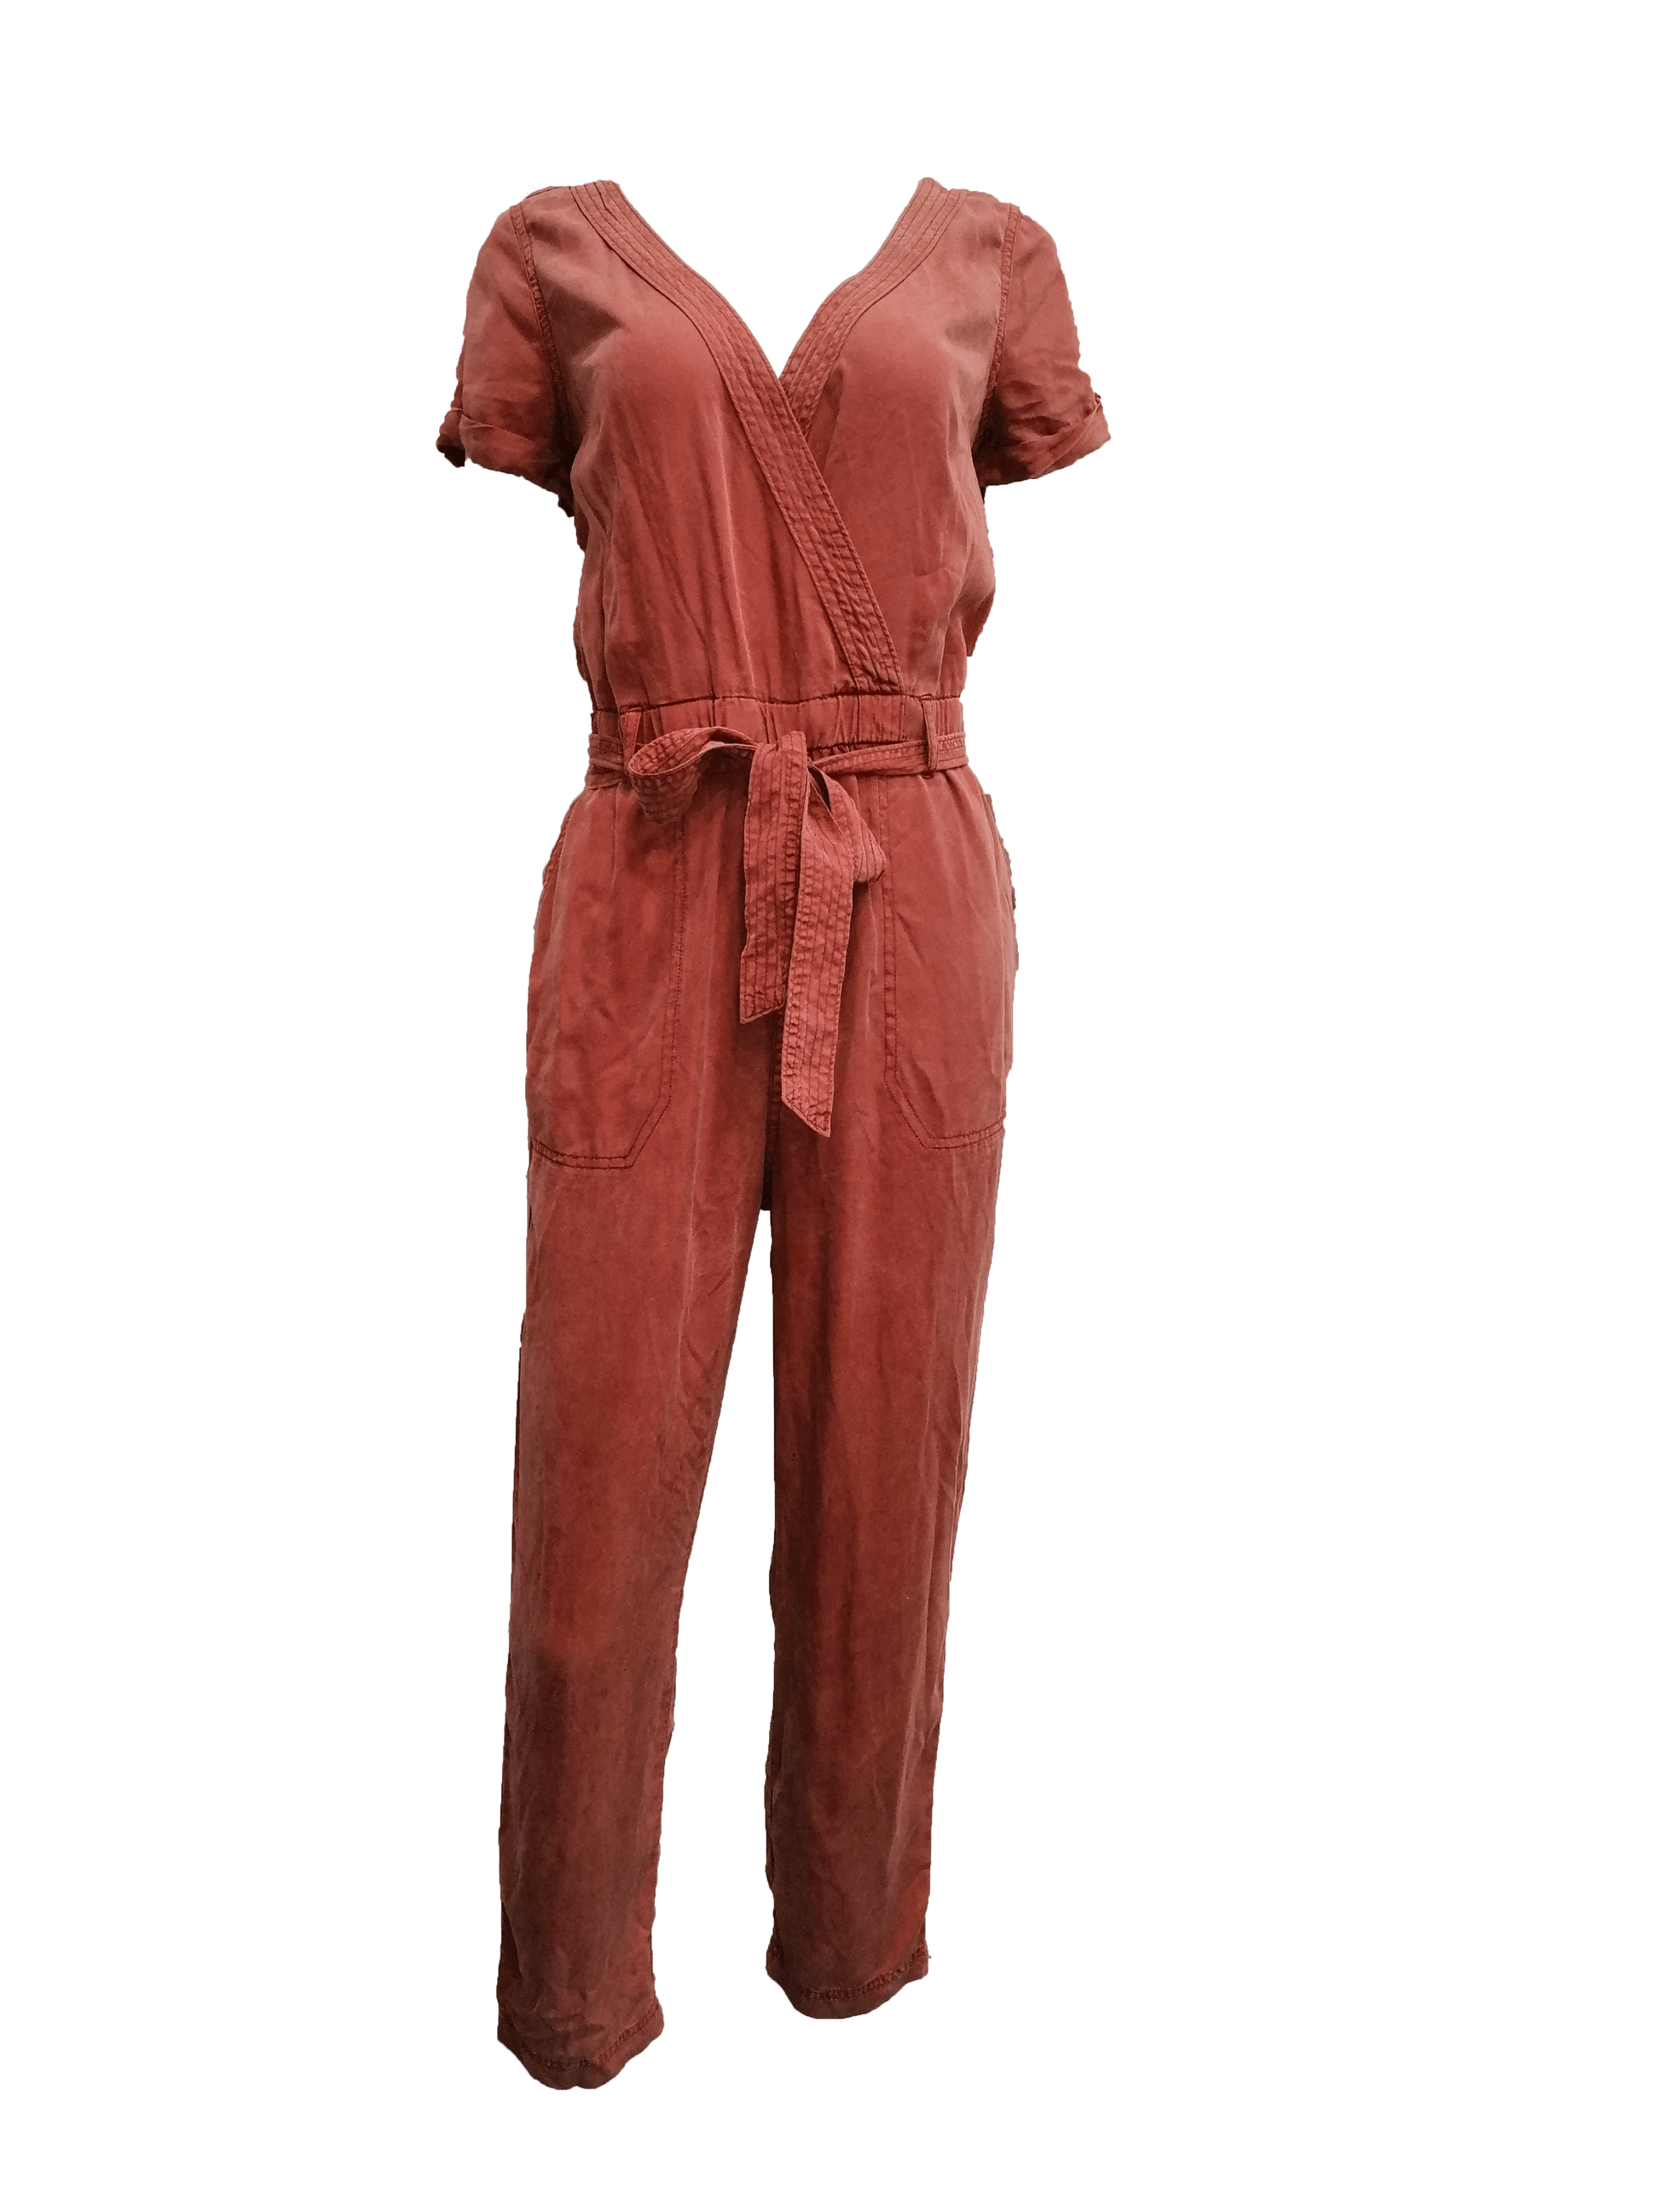 Abercrombie & Fitch Womens Bottoms XS Short Sleeves Jumpsuit